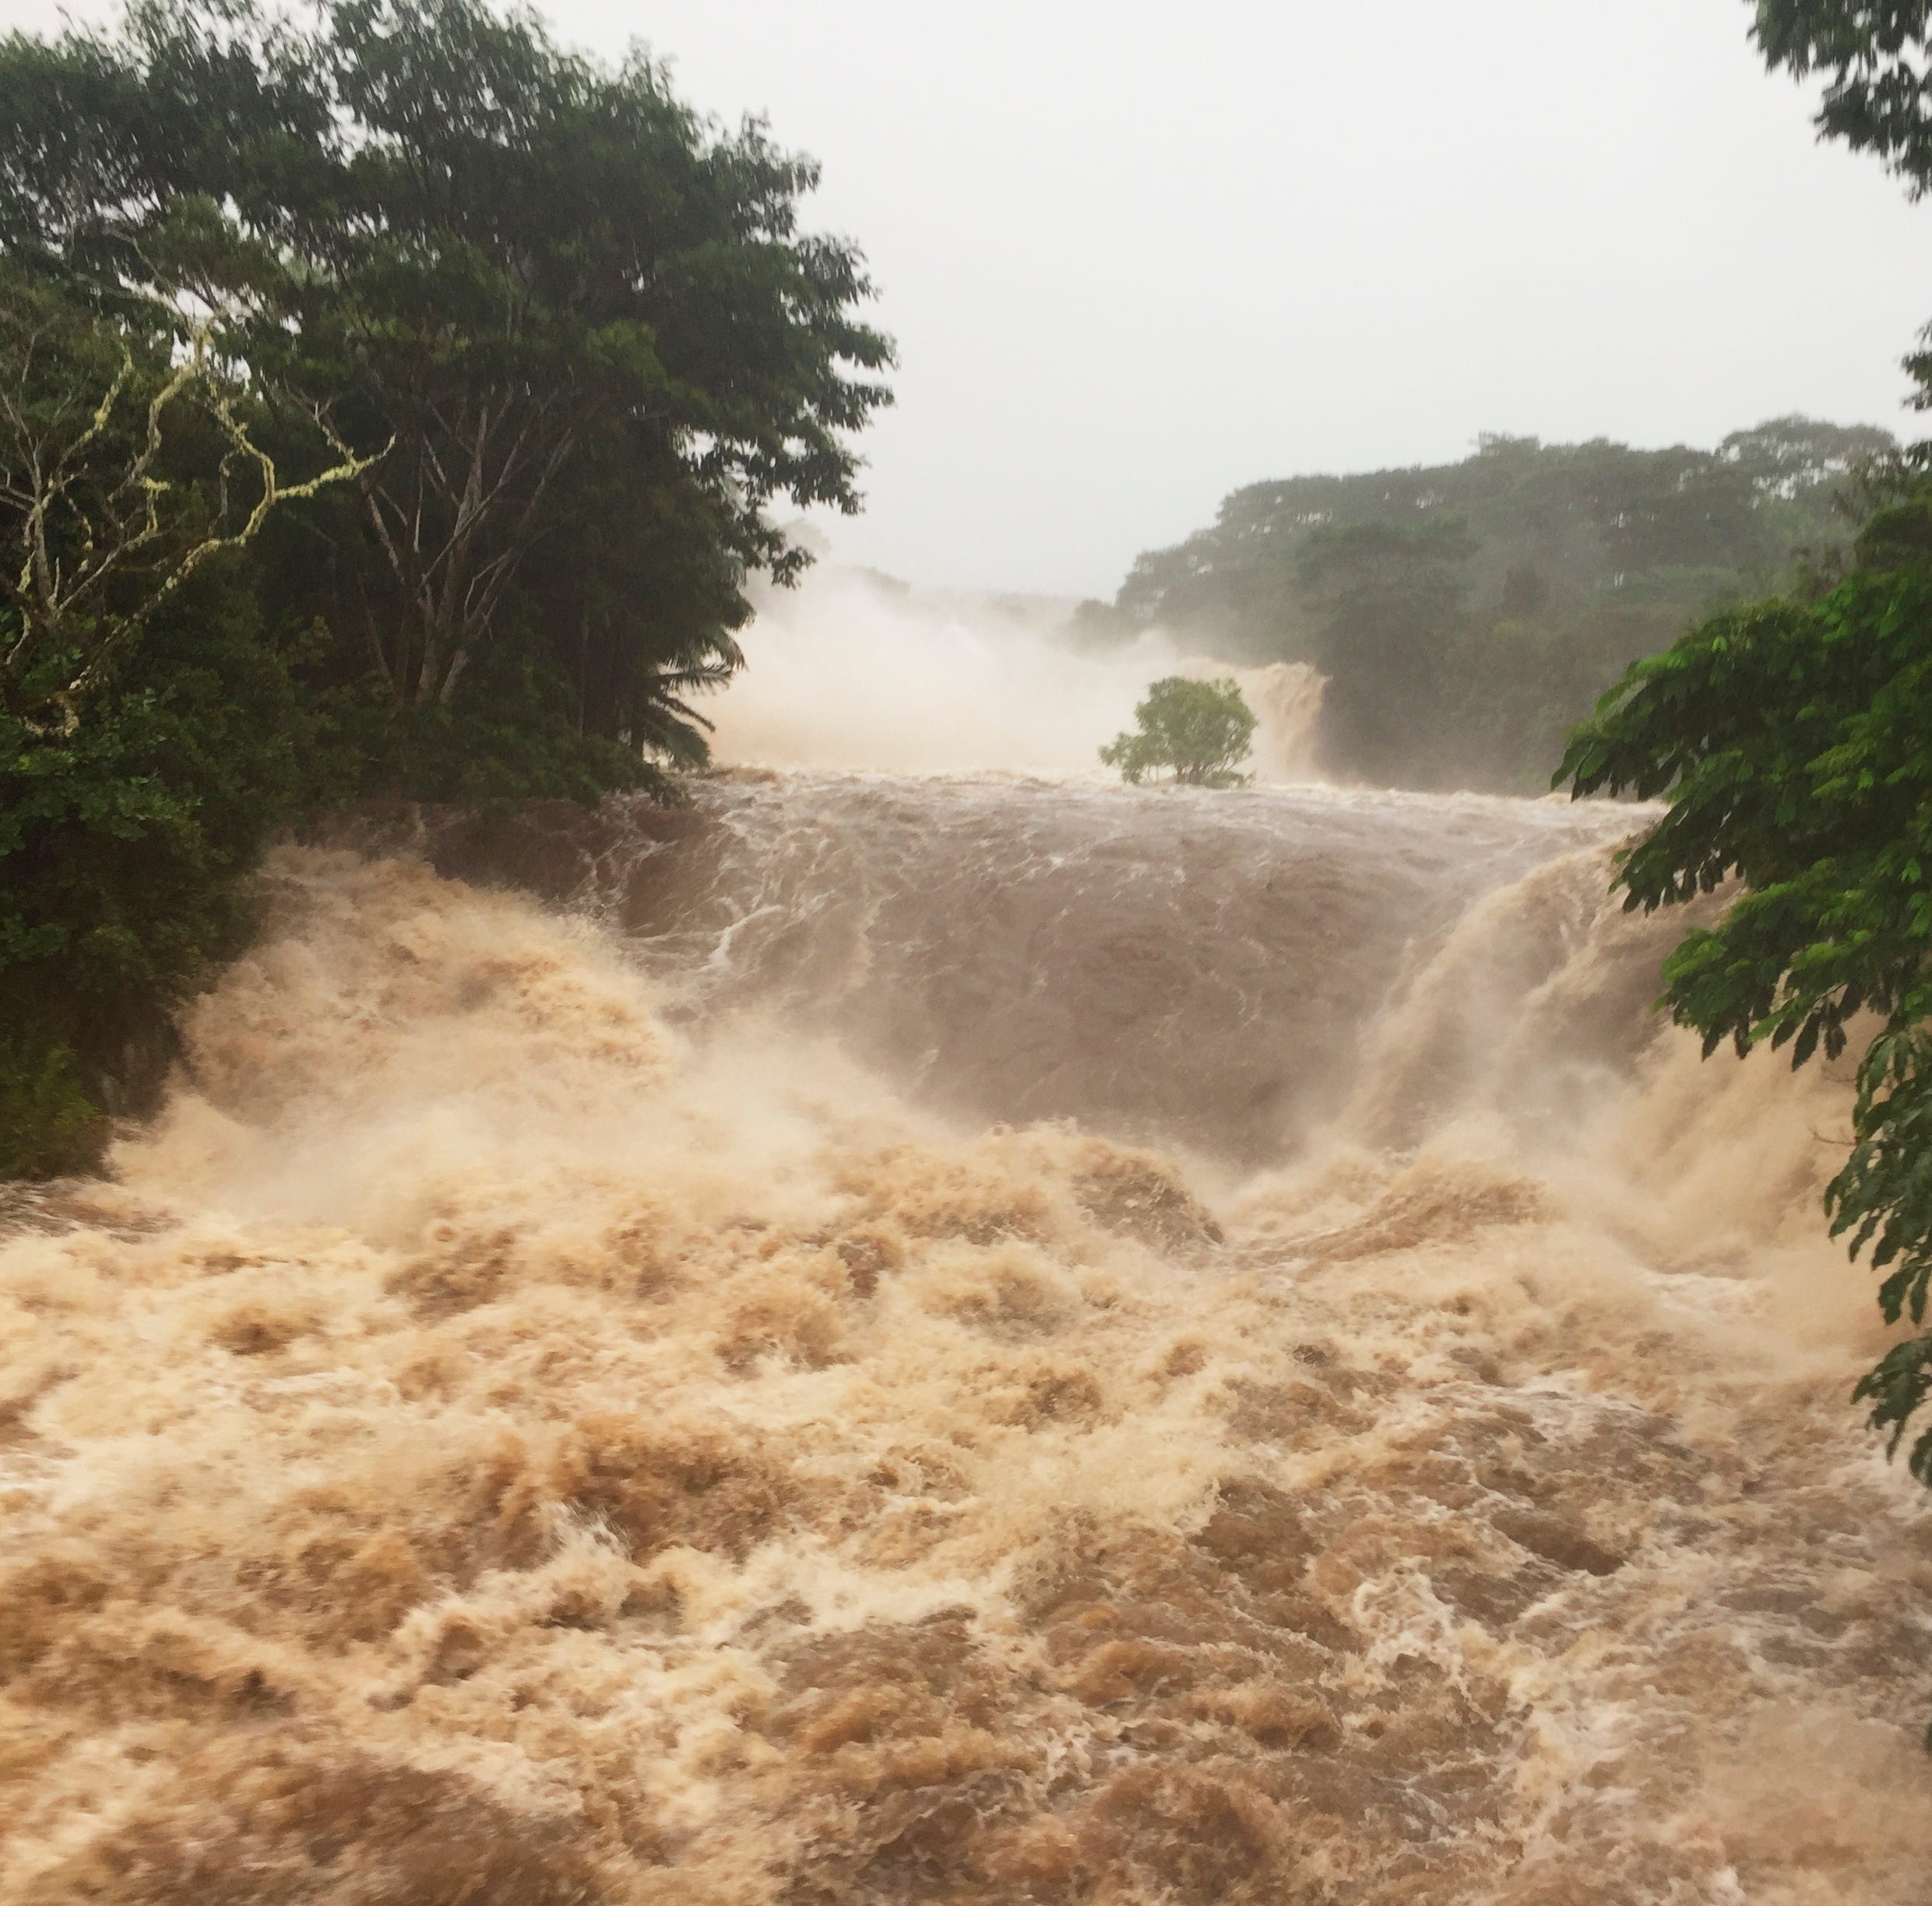 Flooding Thursday, Aug. 23, 2018, on the Wailuku River near Hilo, Hawaii. Hurricane Lane brought torrential rains to Hawaii's Big Island and Maui before the storm was expected to hit Oahu. A powerful hurricane unleashed torrents of rain and landslide